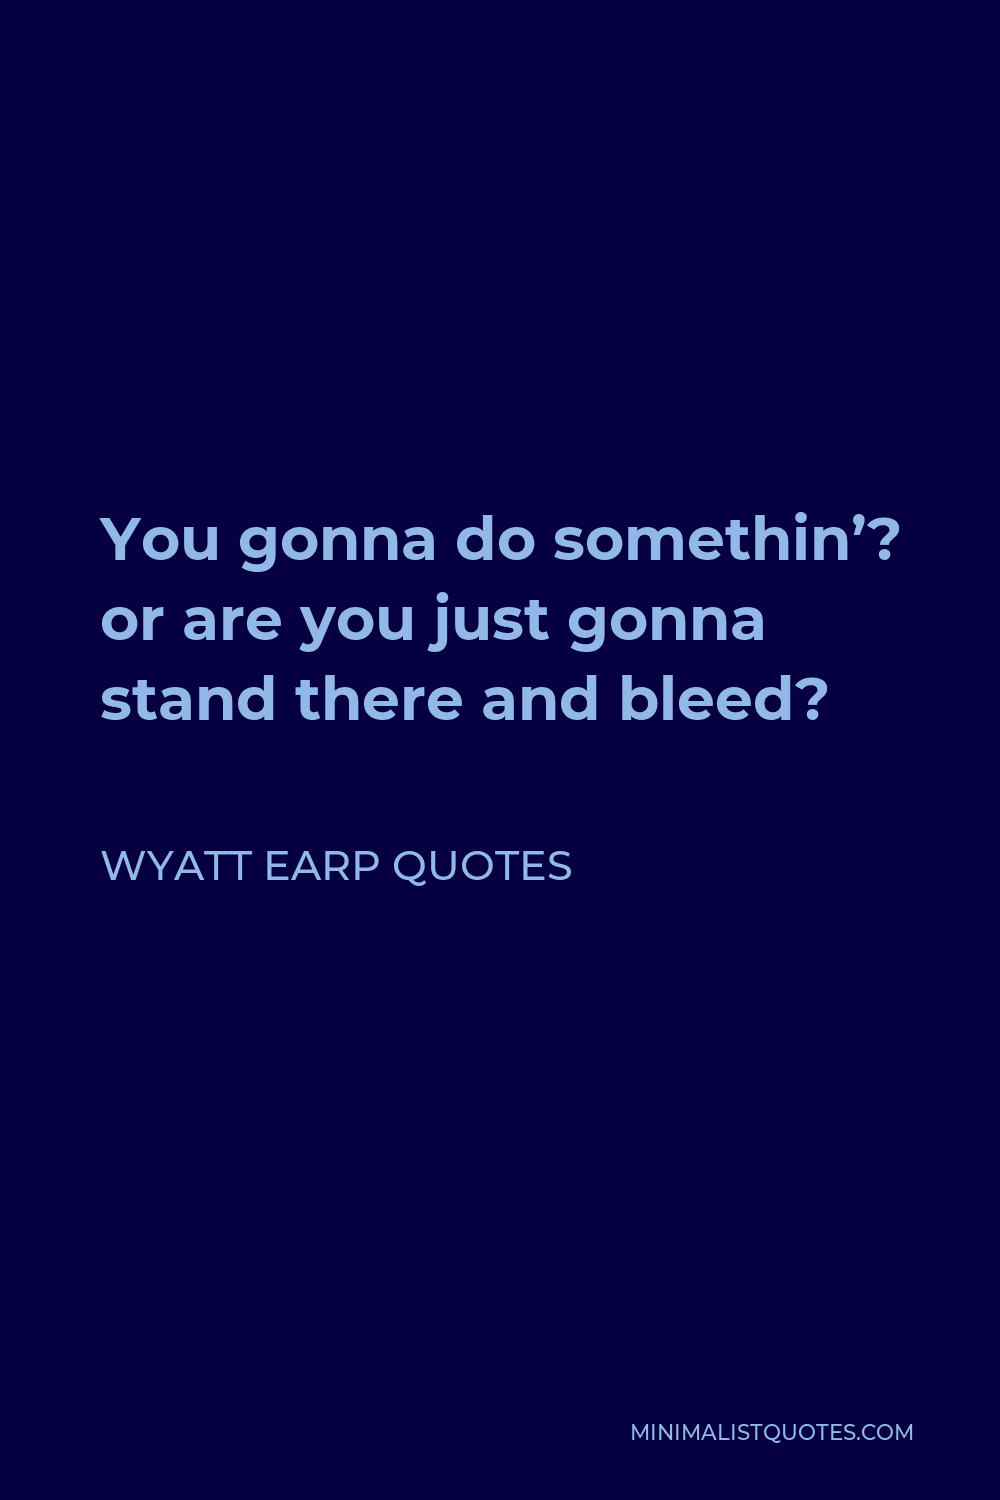 Wyatt Earp Quotes Quote - You gonna do somethin’? or are you just gonna stand there and bleed?